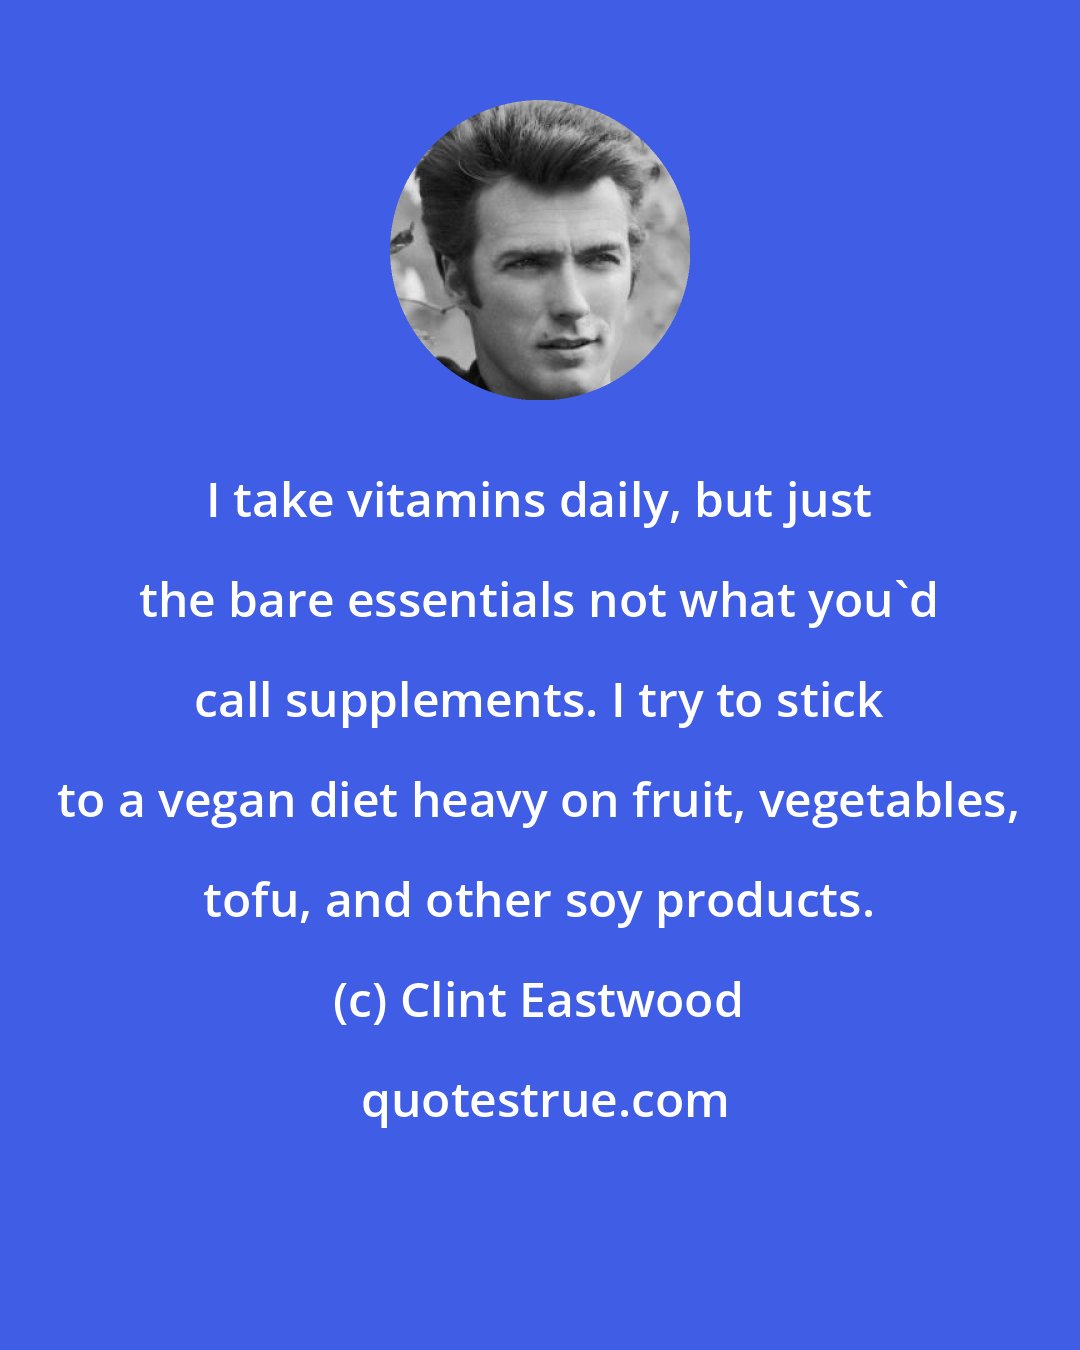 Clint Eastwood: I take vitamins daily, but just the bare essentials not what you'd call supplements. I try to stick to a vegan diet heavy on fruit, vegetables, tofu, and other soy products.